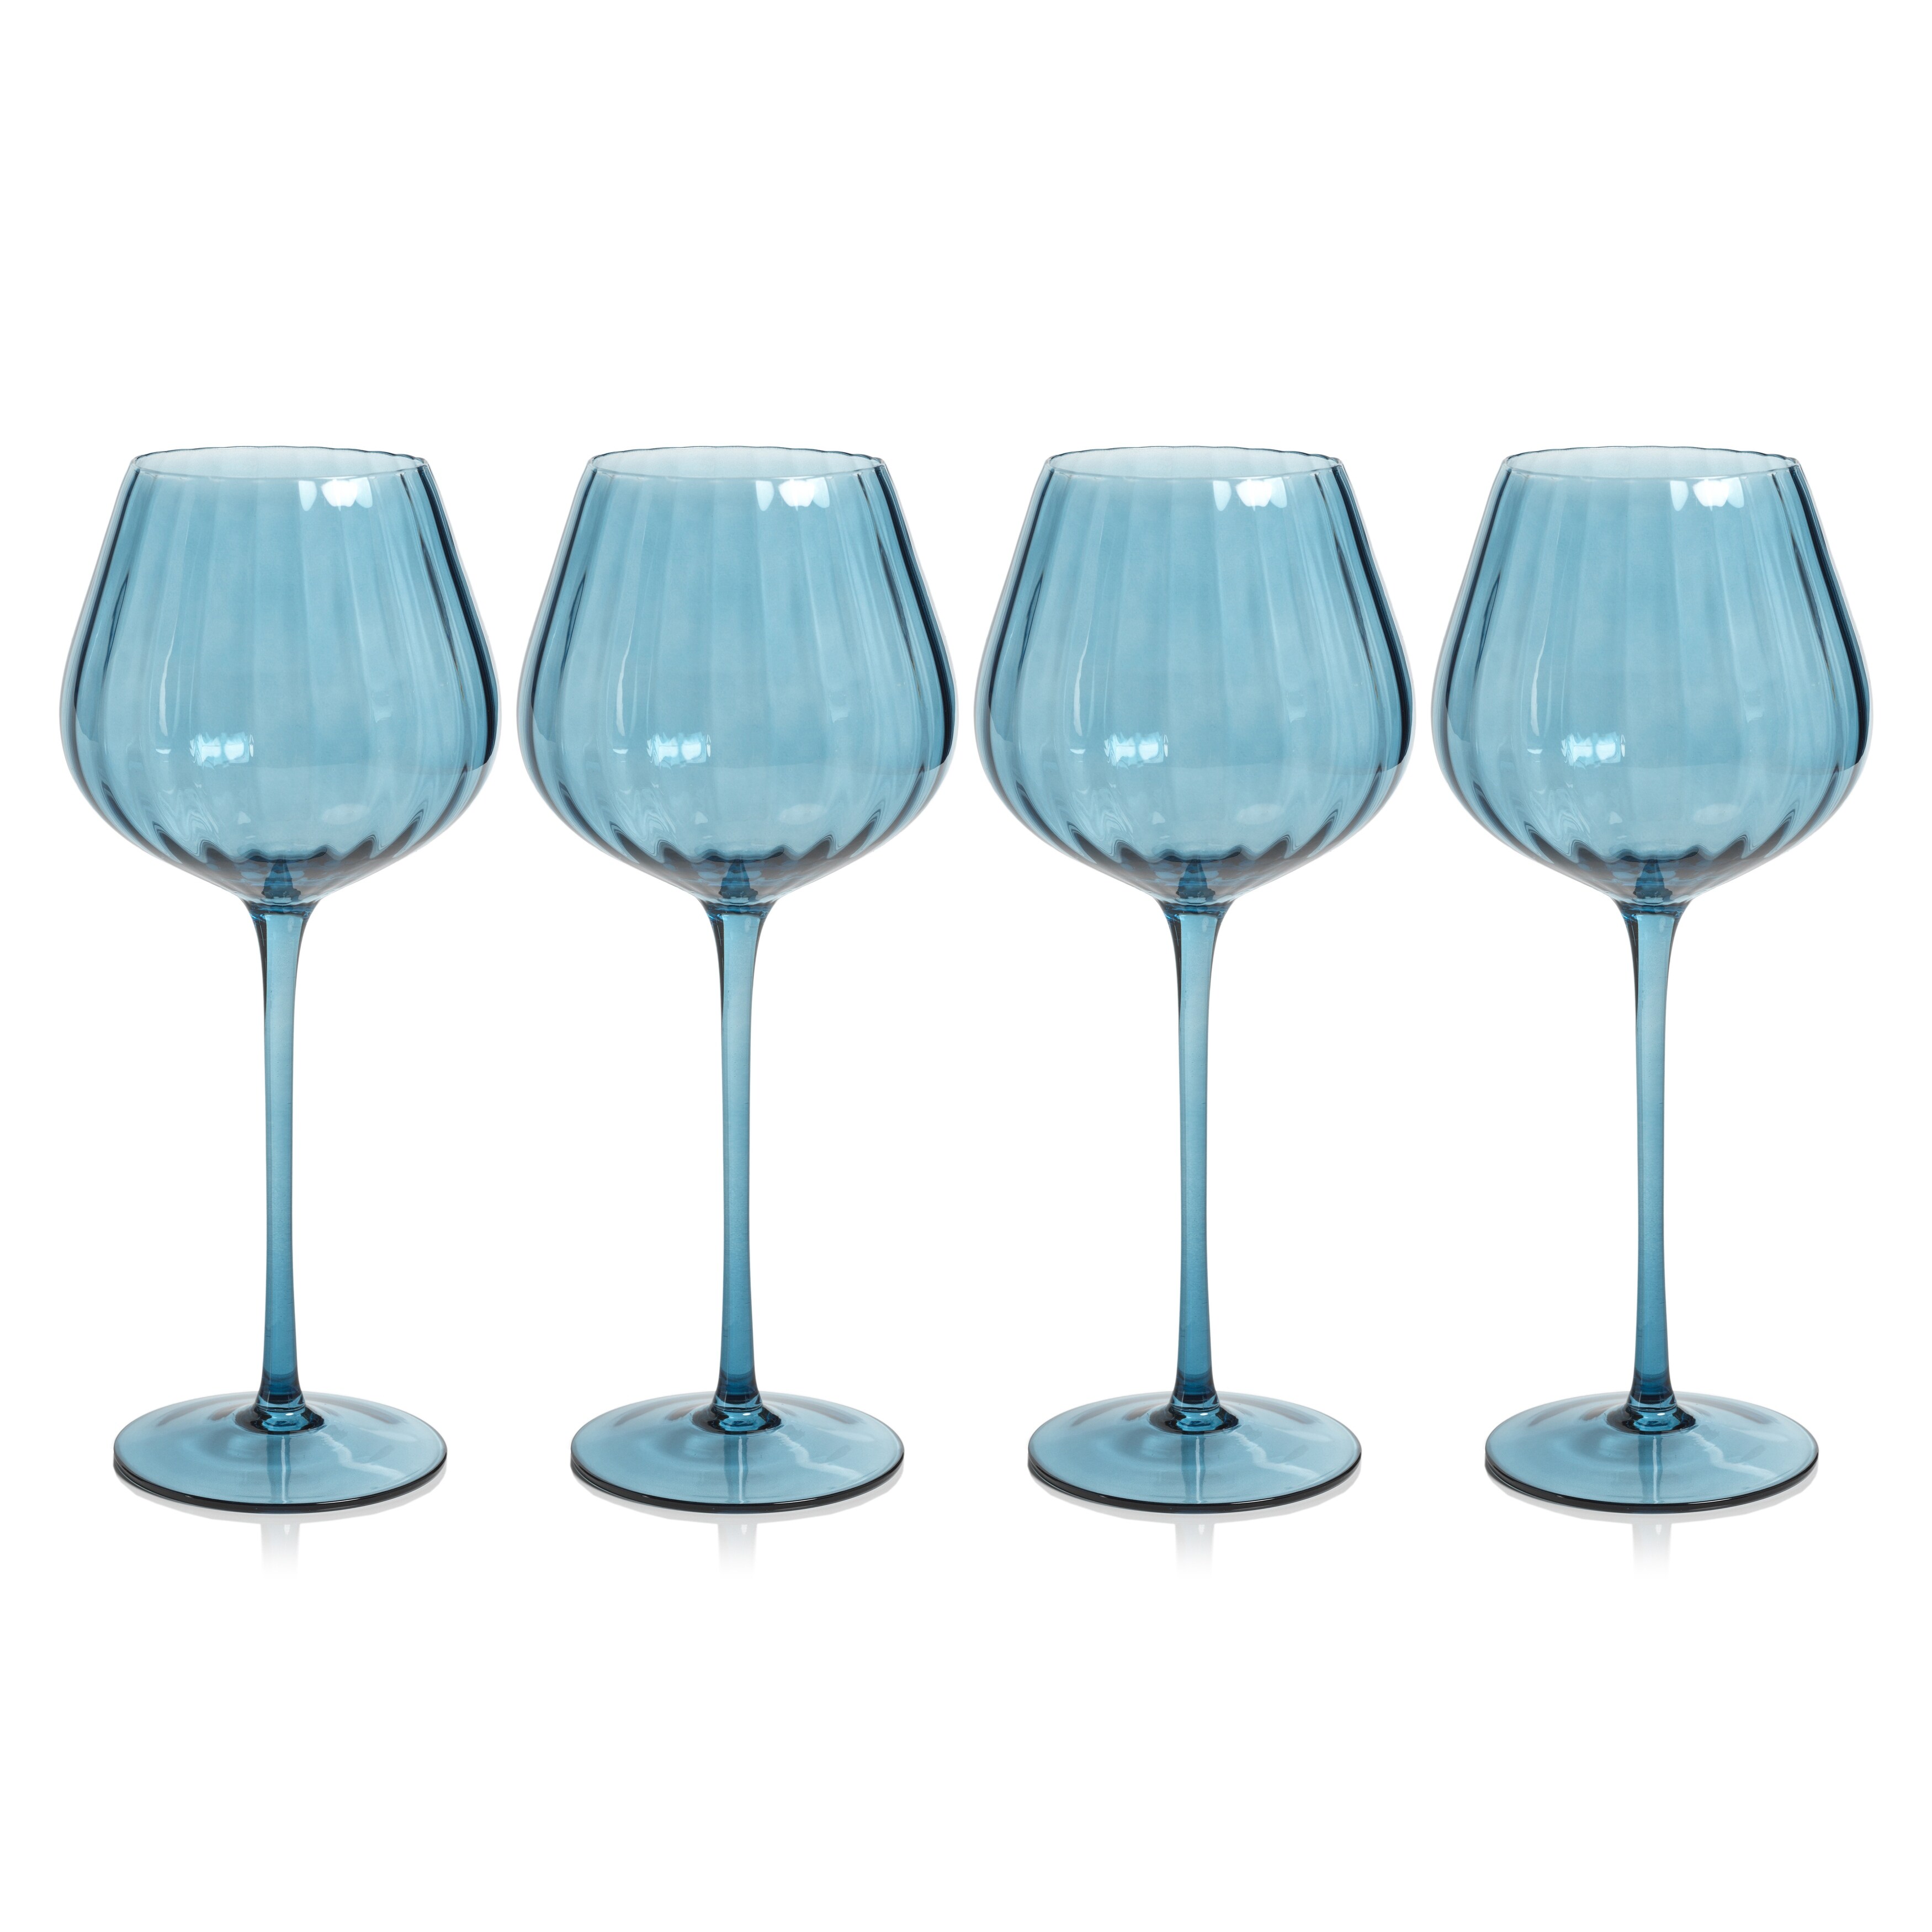 Clear Malden Optic Martini Glasses, Set of 4 by Zodax